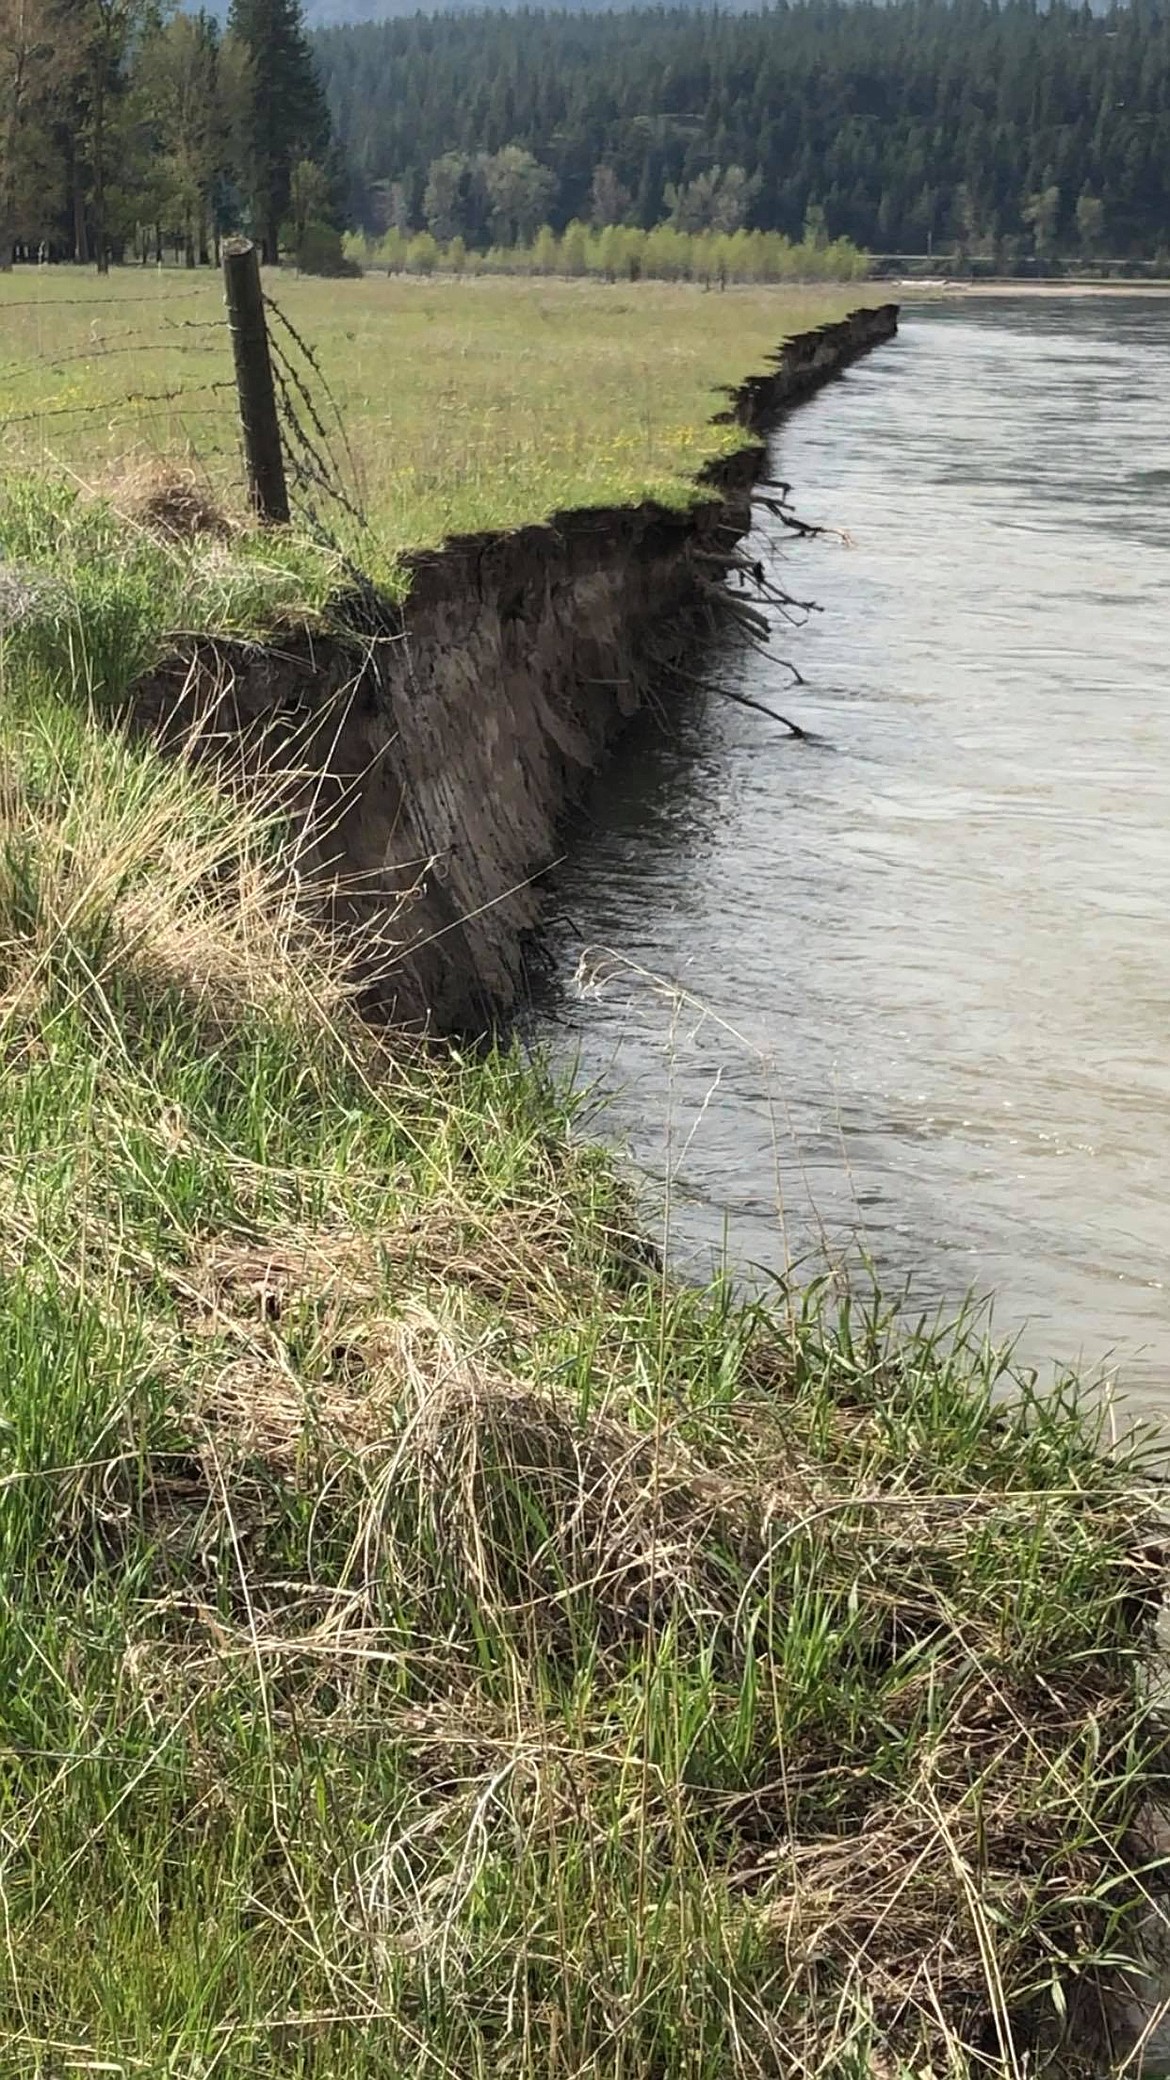 The bank of the Clark Fork River is being cut away by rising water as it sits behind the wastewater treatment lagoons in Plains.